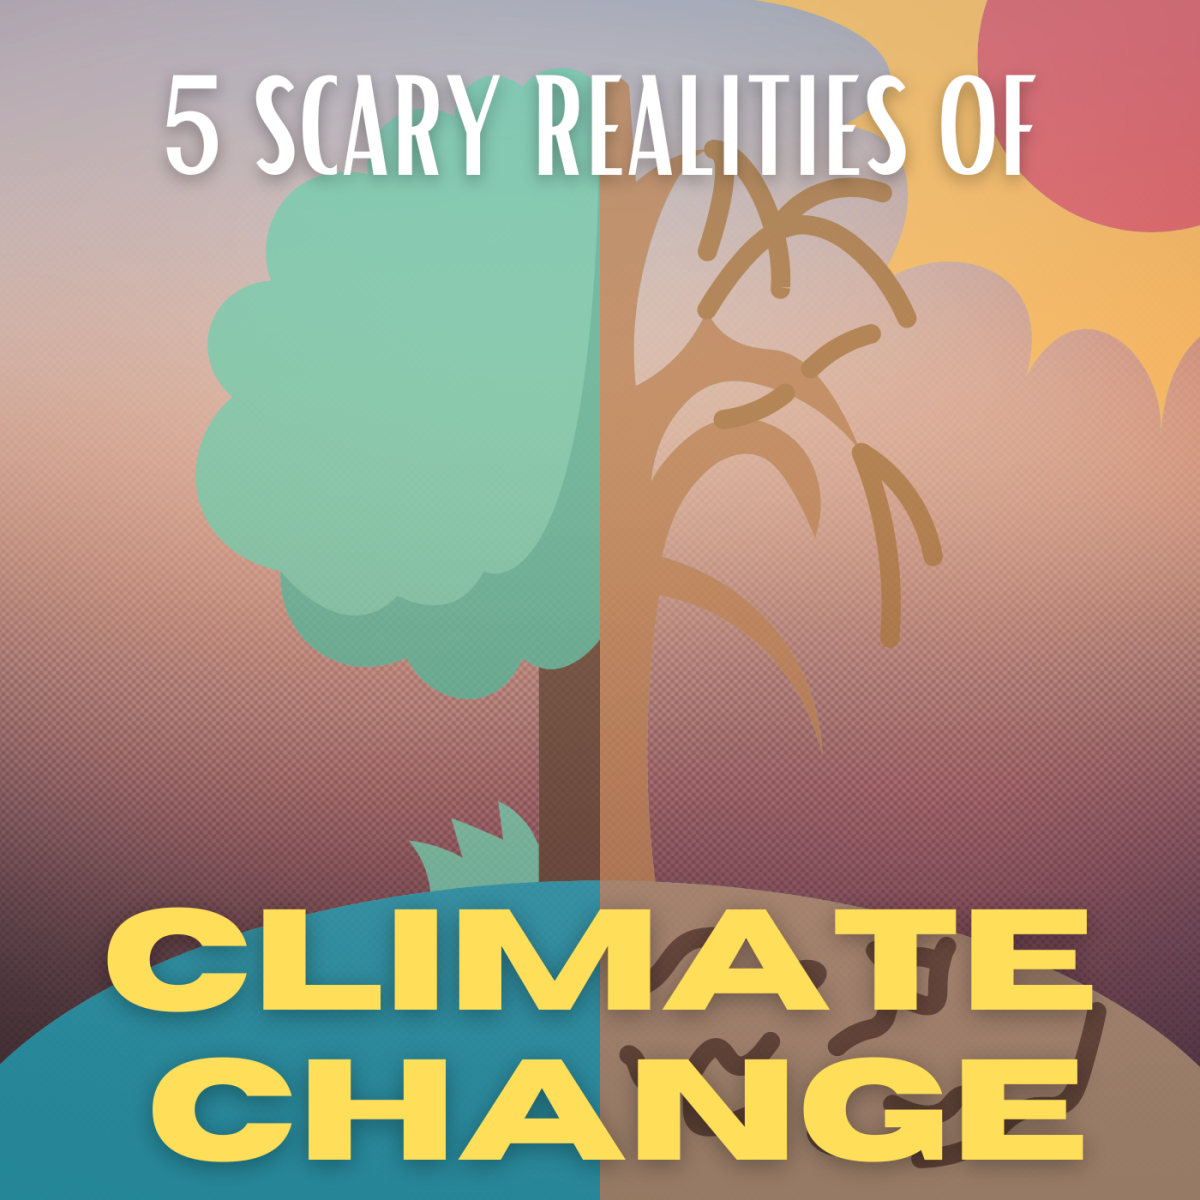 Top 5 Scary Realities of Climate Change